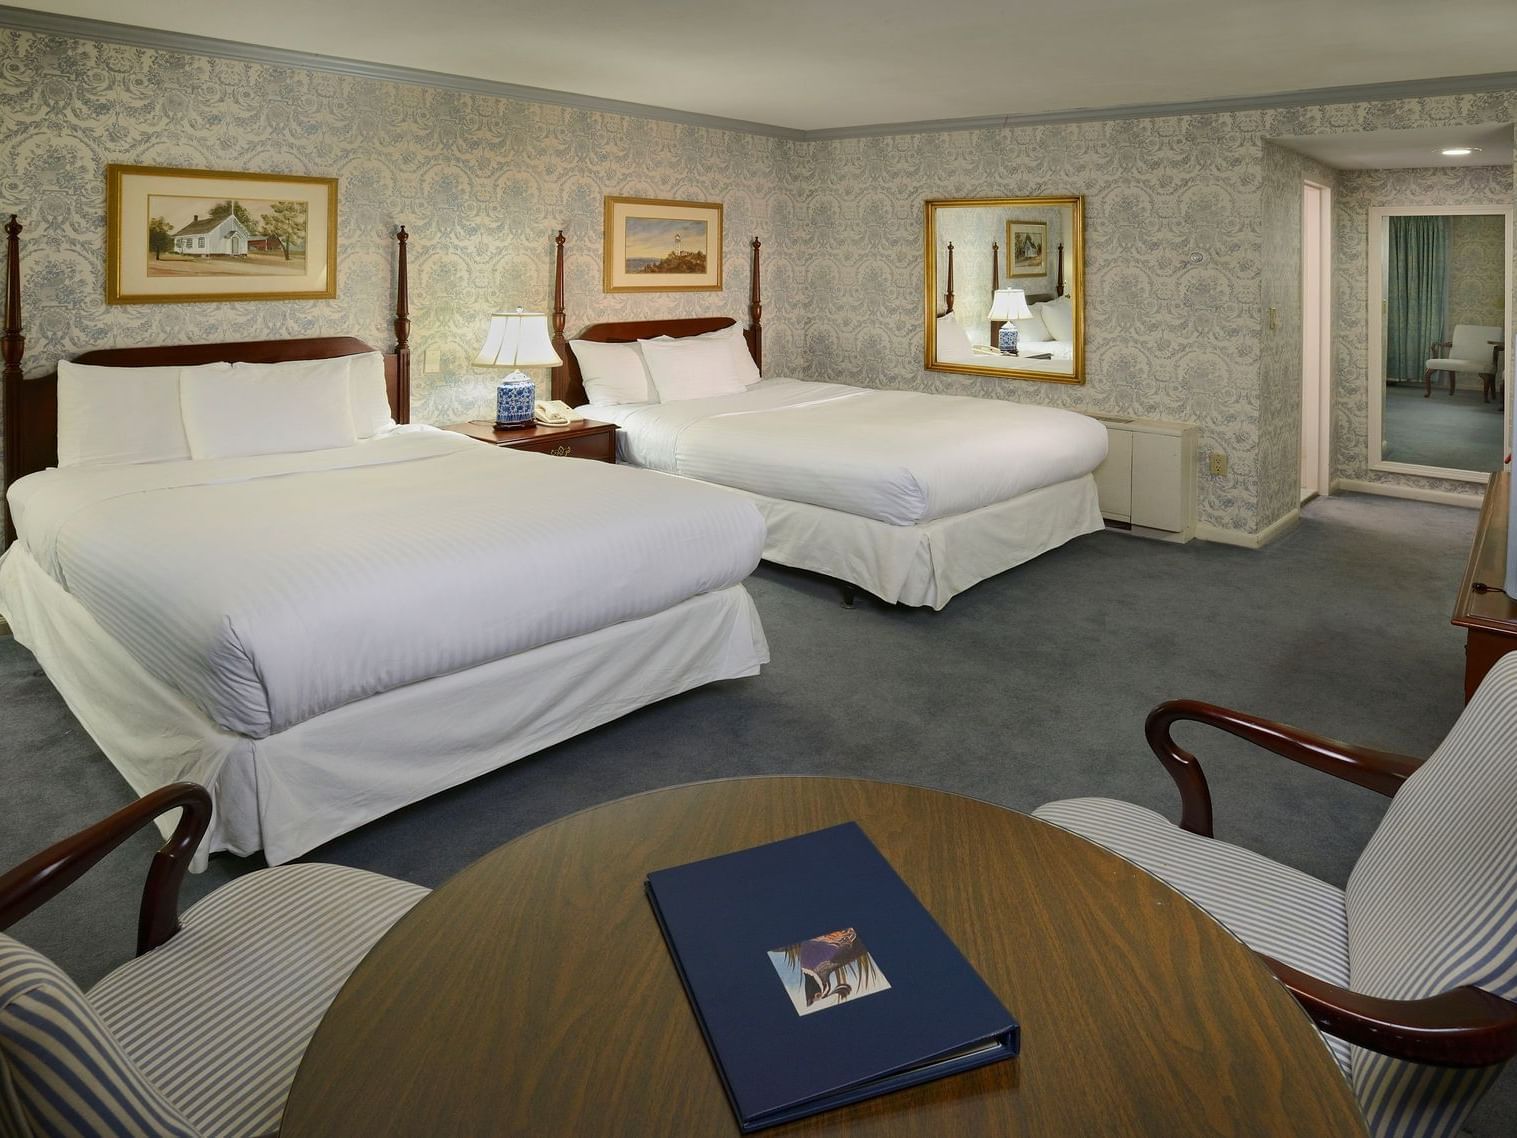 Twin beds in Two Double Standard at Avon Old Farms Hotel